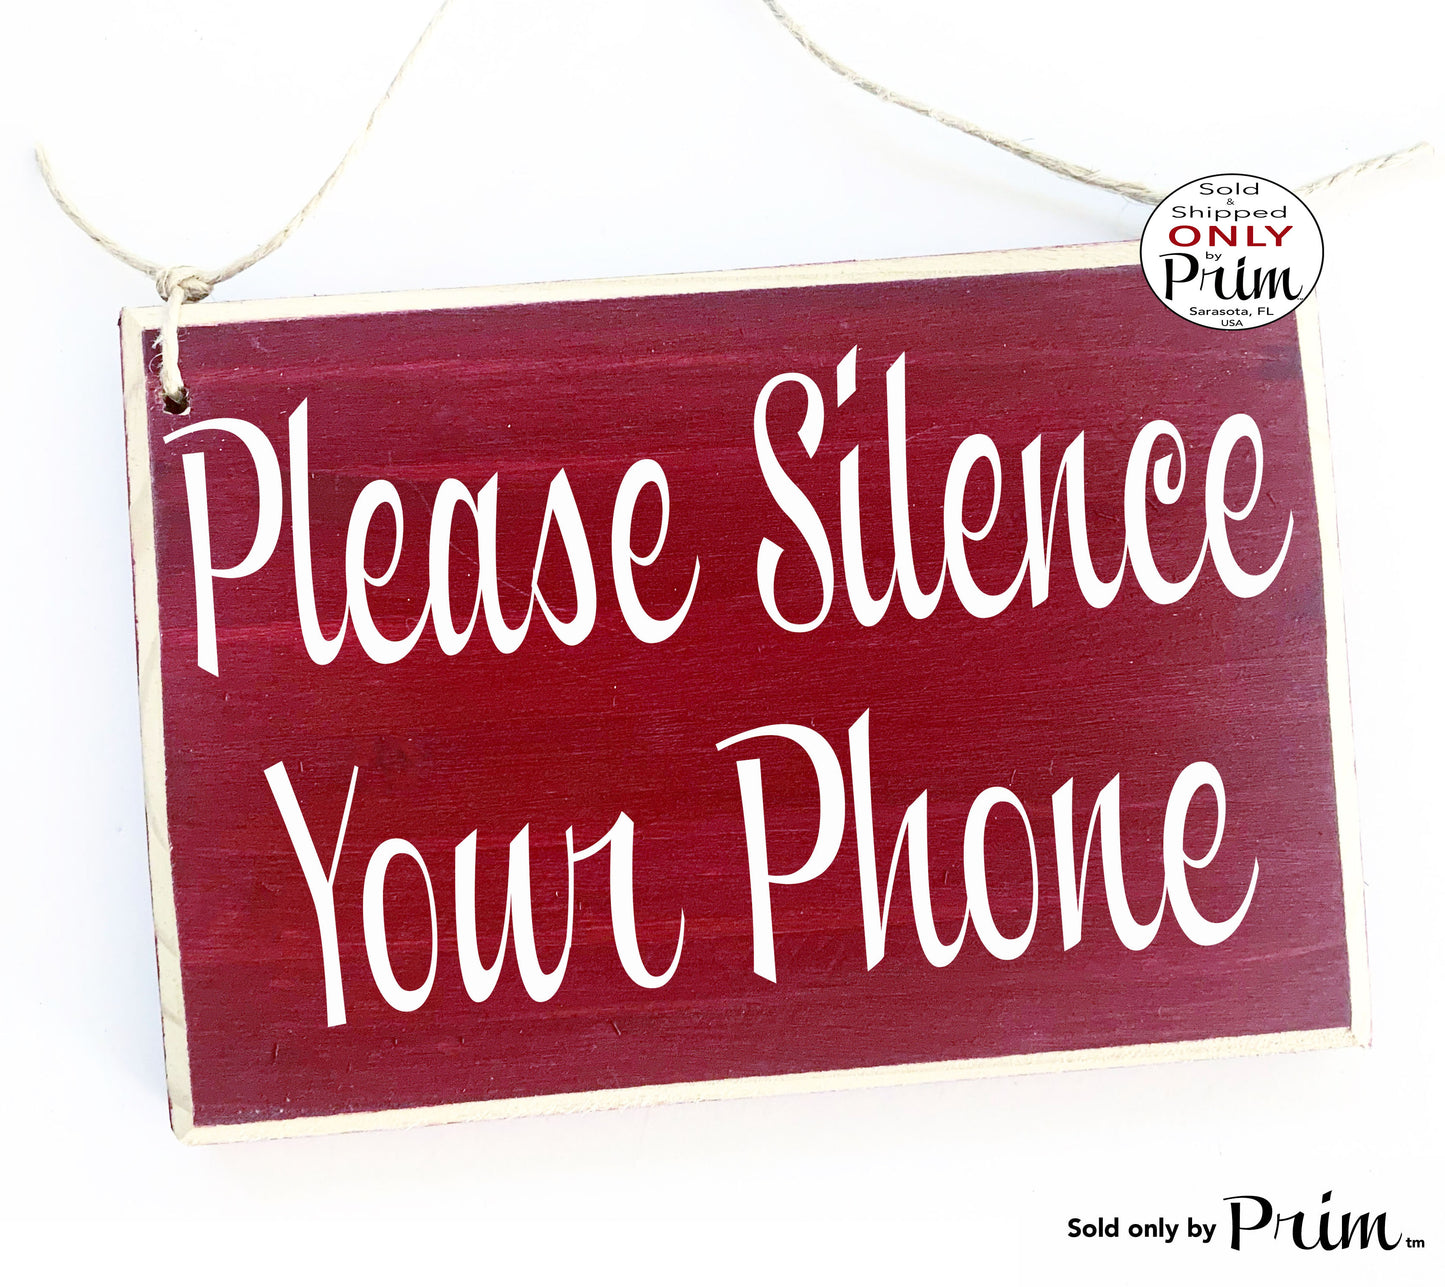 8x6 Please Silence Your Phone Custom Wood Sign Refrain From Talking on Your Cell Phone Shhh In Session Quiet Soft Voices Office Door Plaque Designs by Prim